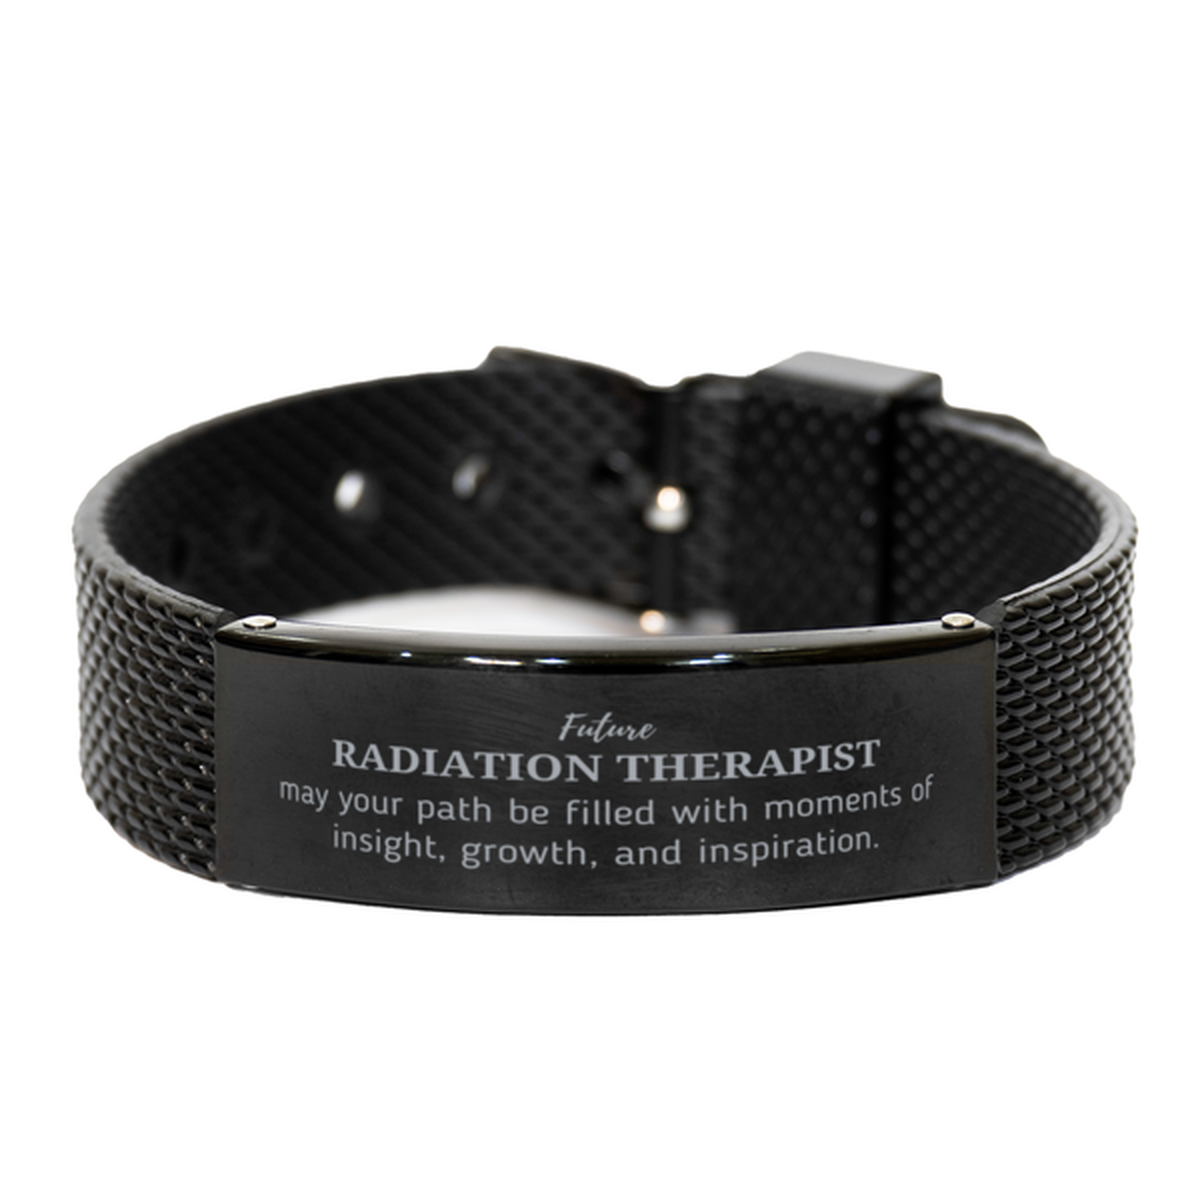 Future Radiation Therapist Gifts, May your path be filled with moments of insight, Graduation Gifts for New Radiation Therapist, Christmas Unique Black Shark Mesh Bracelet For Men, Women, Friends